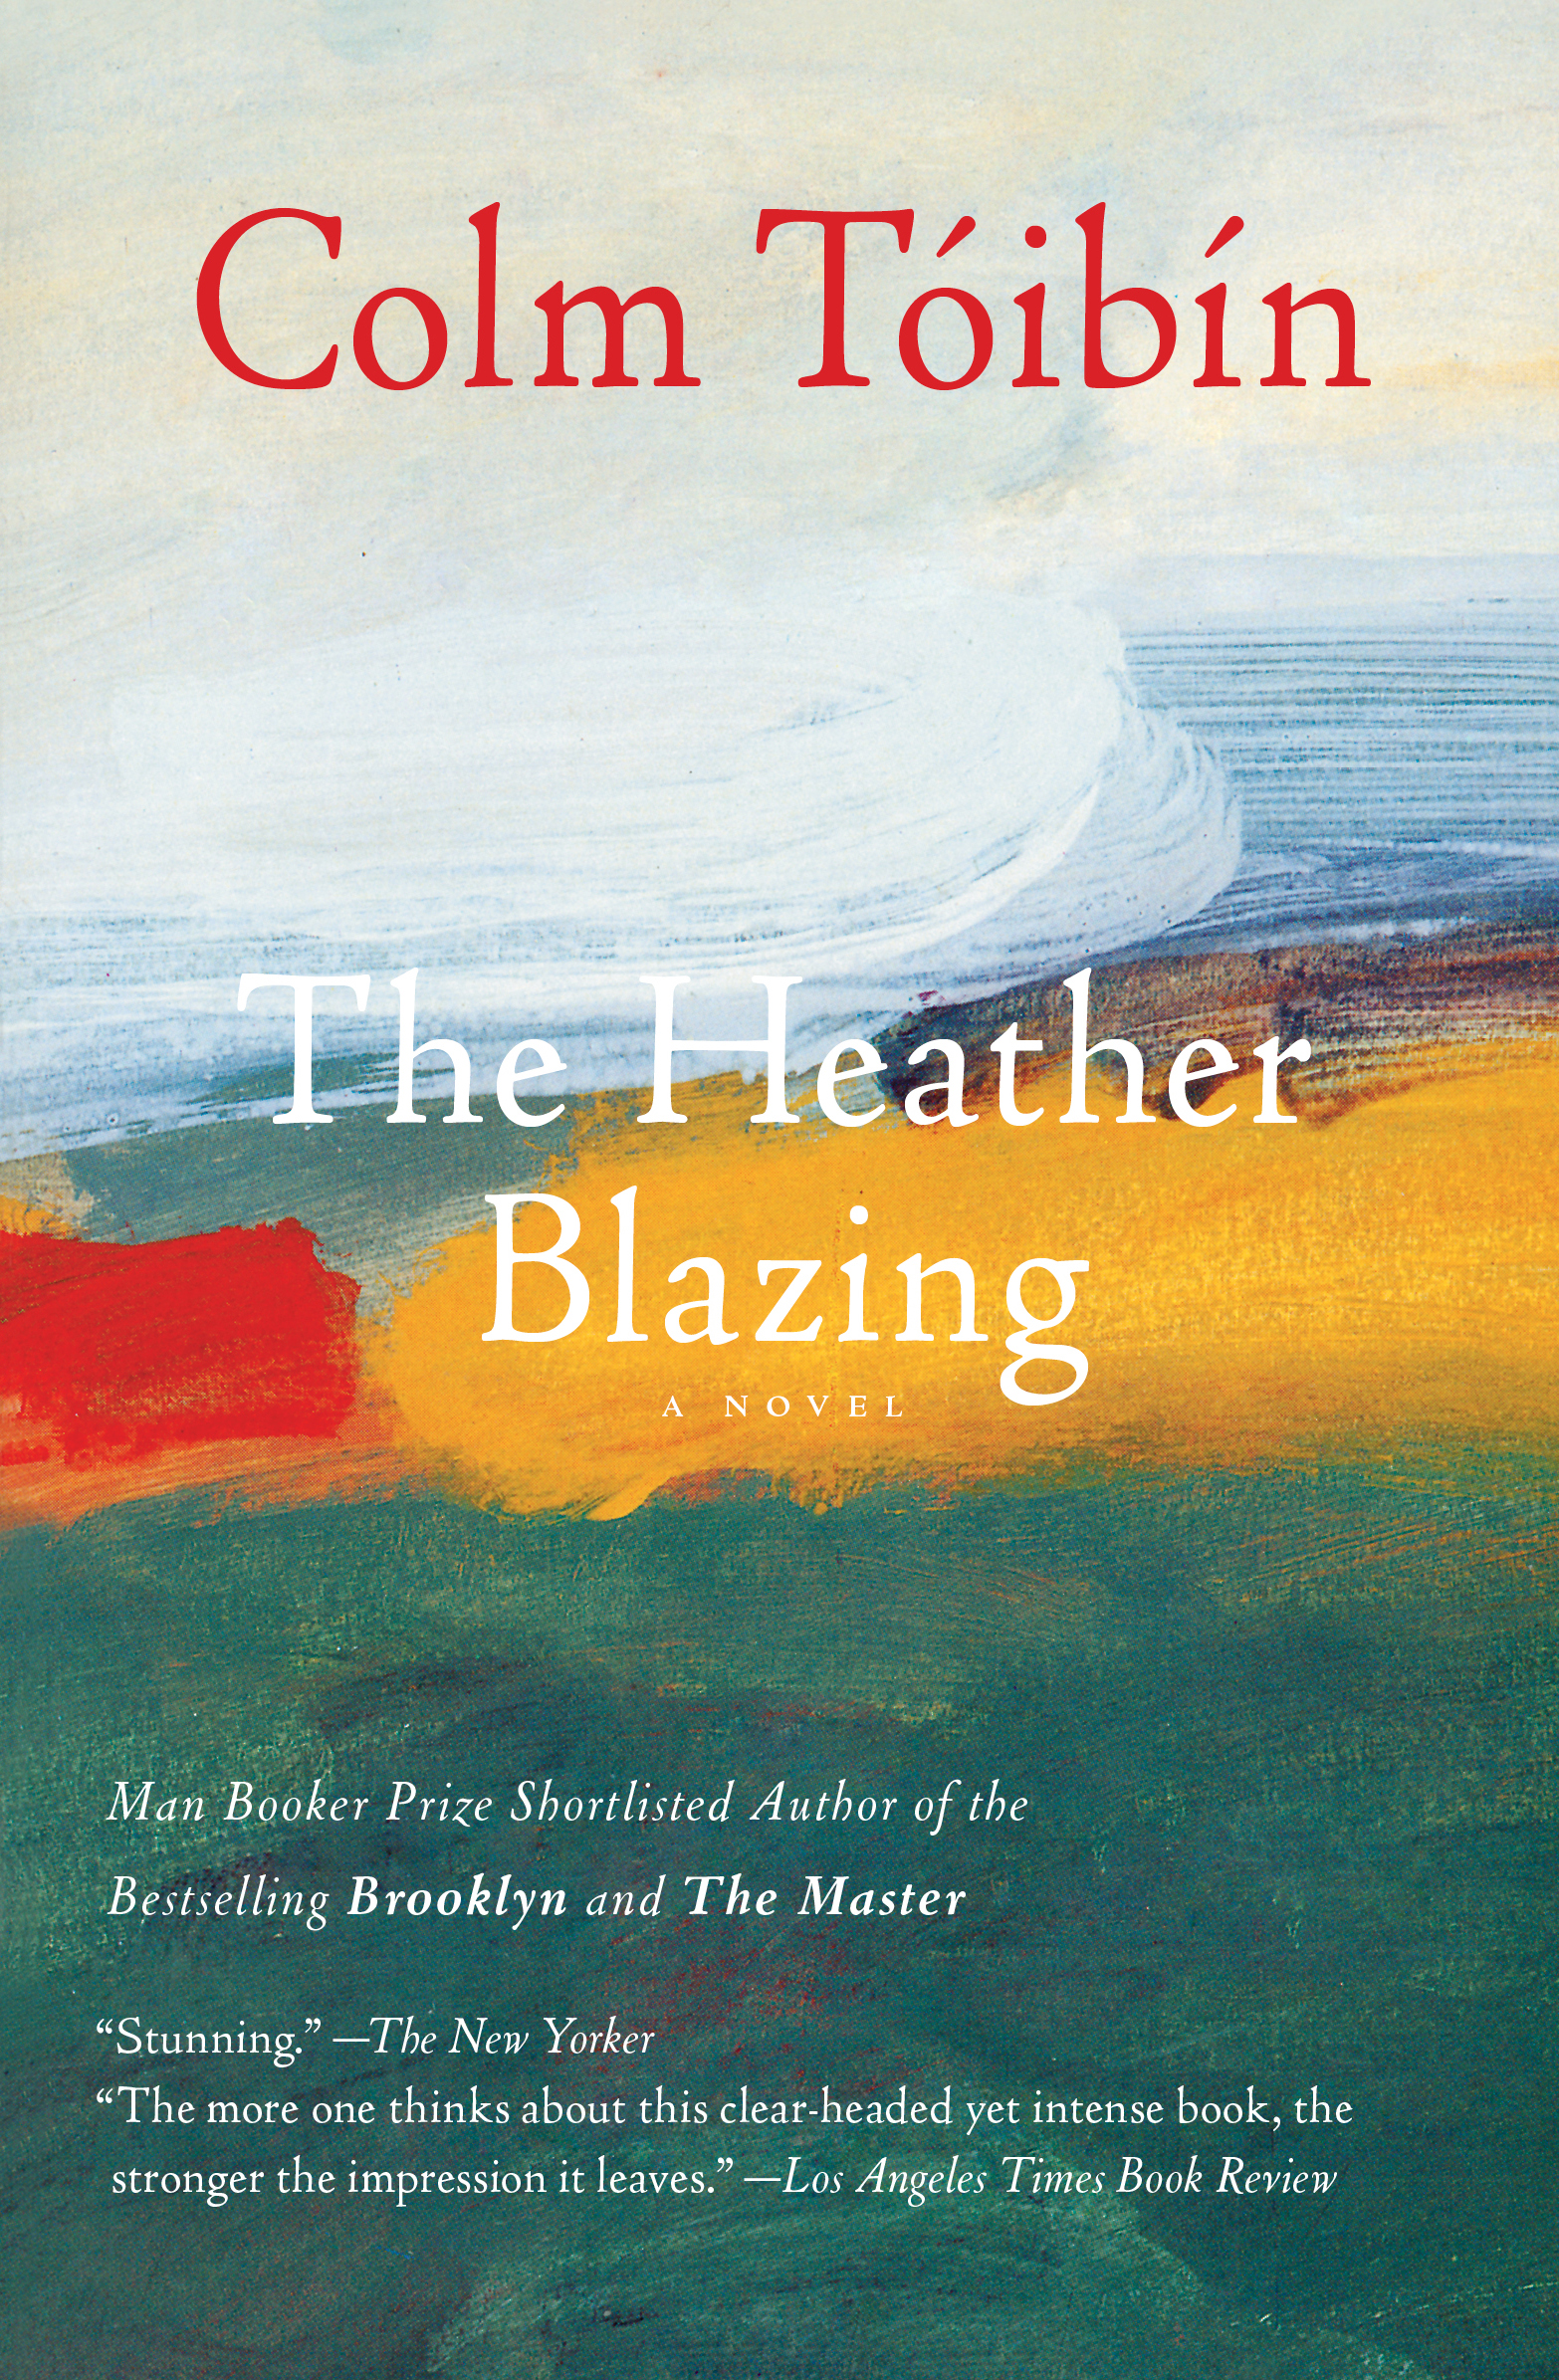 The Heather Blazing book cover